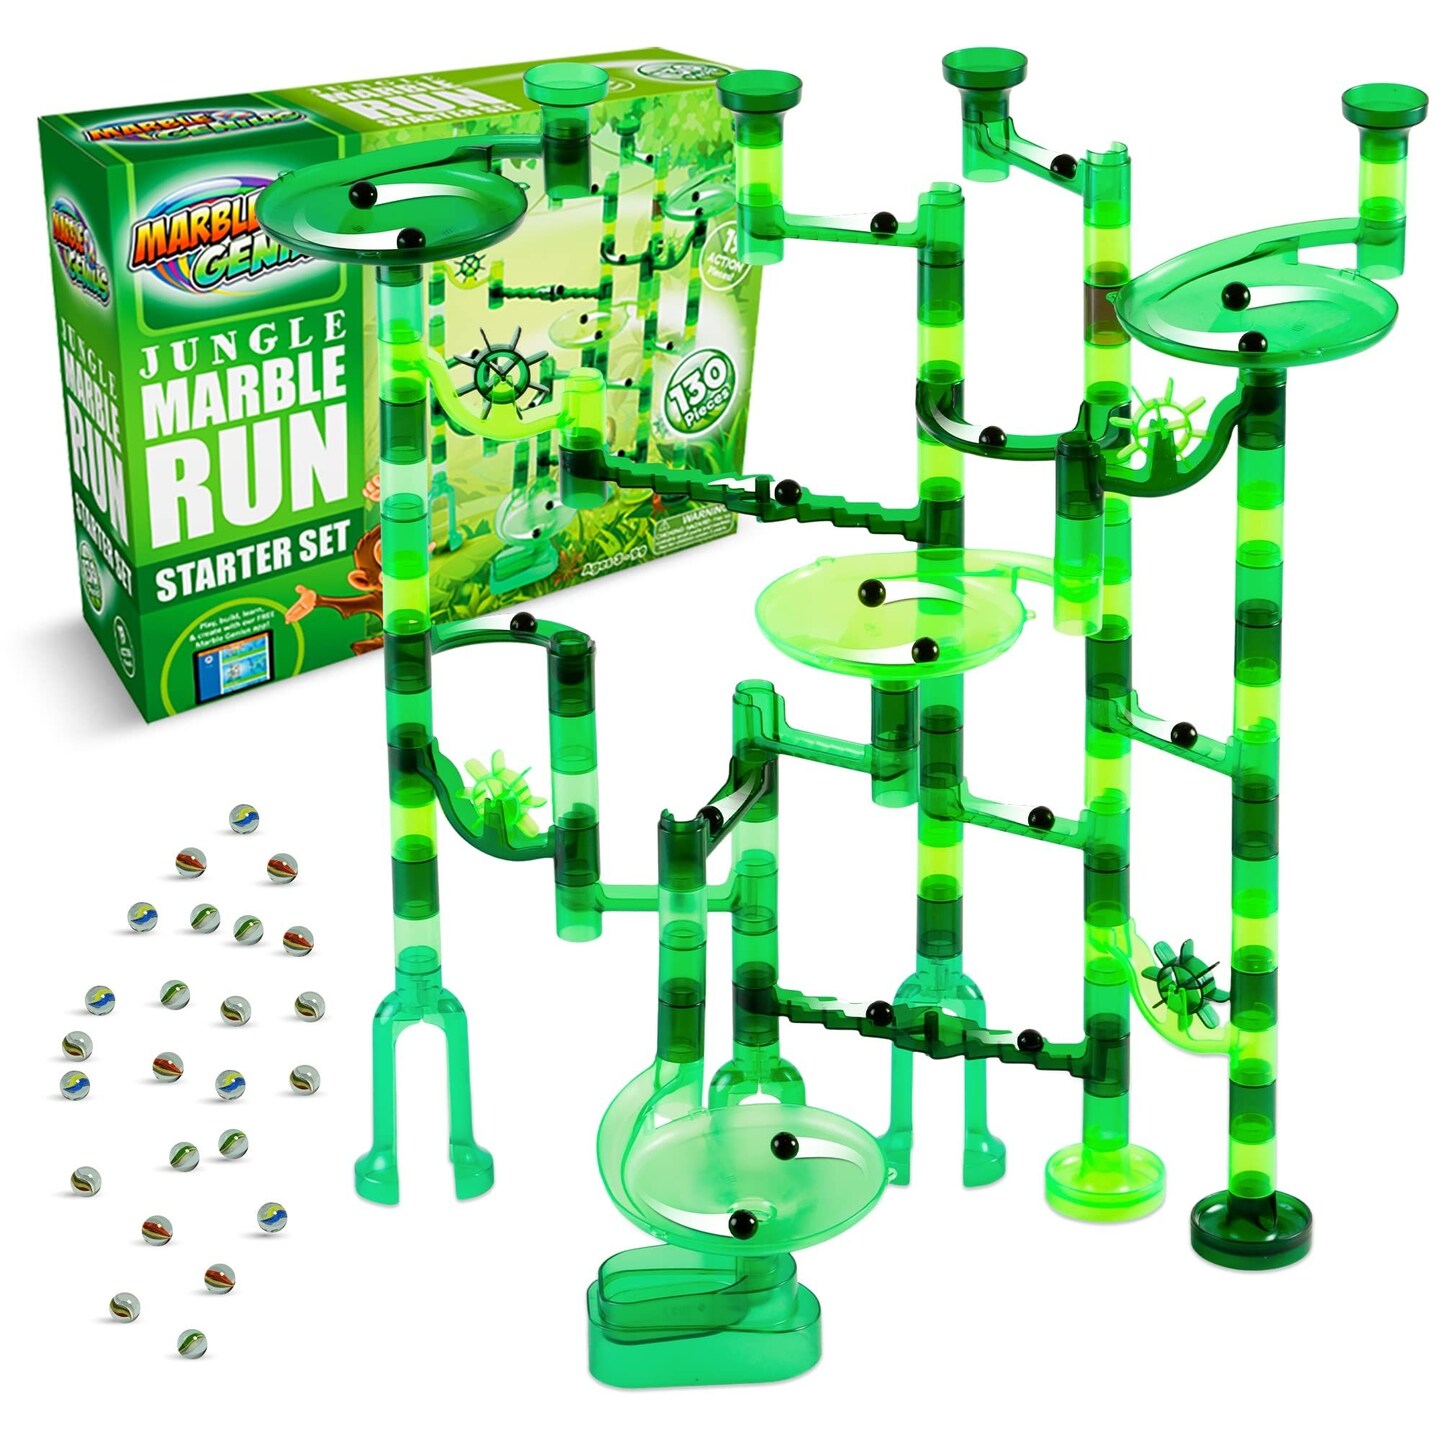 Marble Genius Marble Run Starter Set STEM Toy for Kids Ages 4 - 12 - 130 Complete Pieces (80 Translucent Marbulous Pieces and 50 Glass Marbles), Construction Building Block Toys, Theme (Jungle)